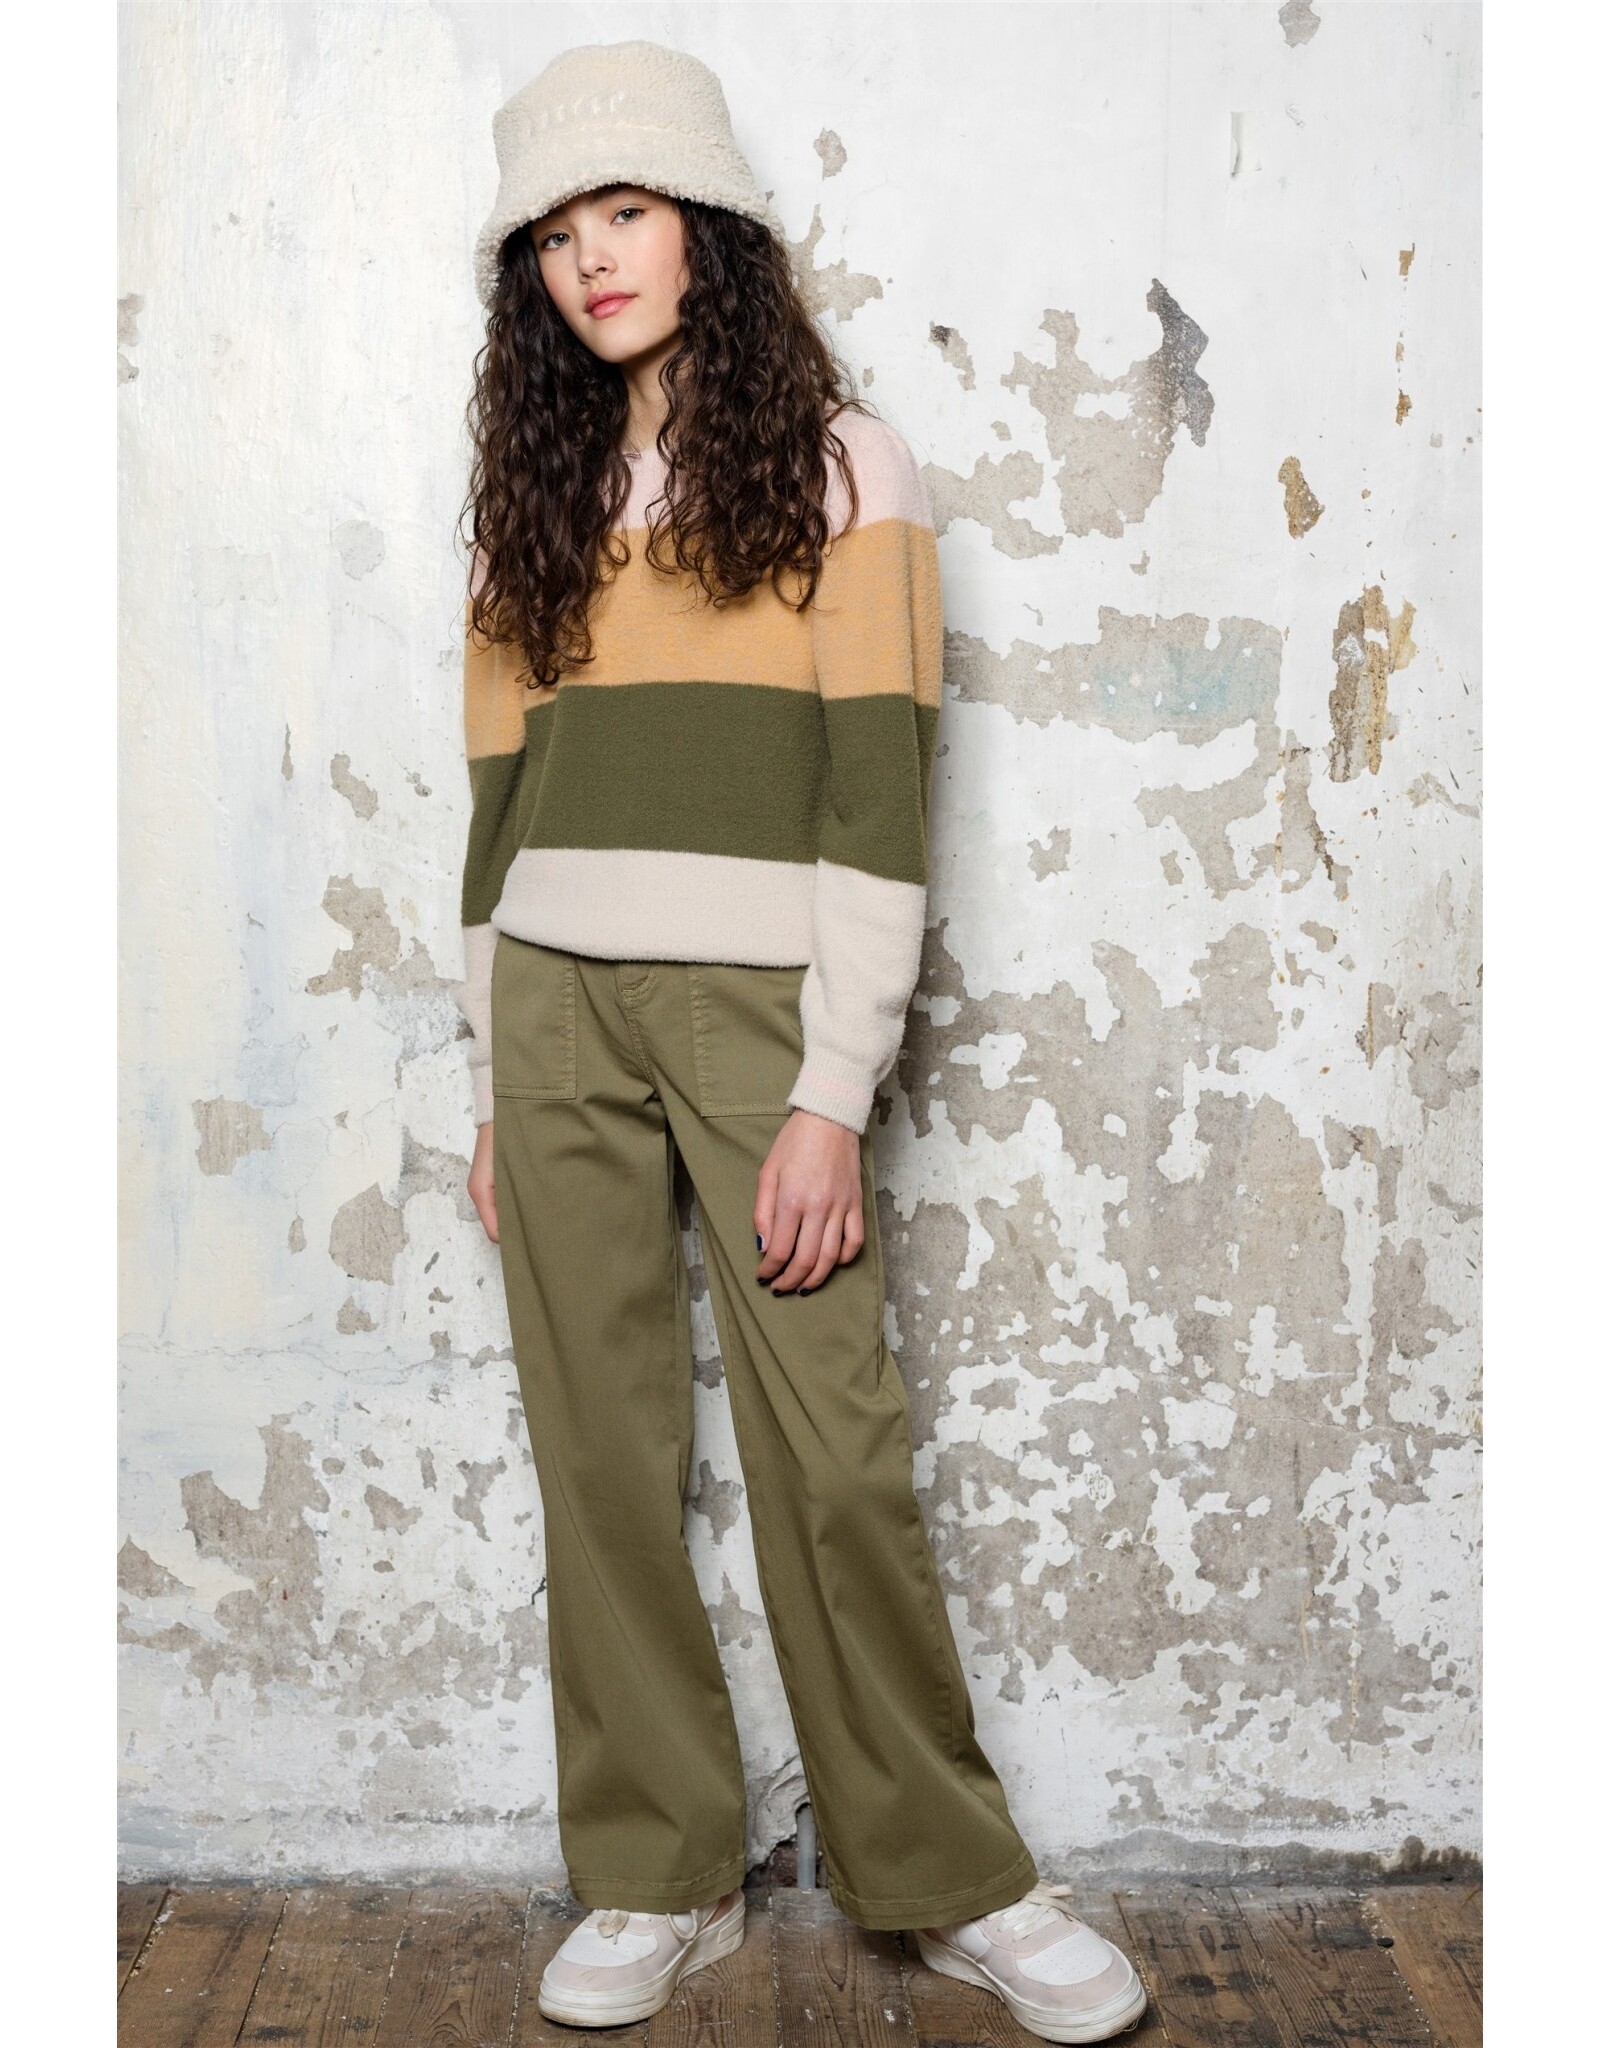 Nobell NoBell' Simoa girls g/dyed cargo palazzo pants olive green Burnt Olive